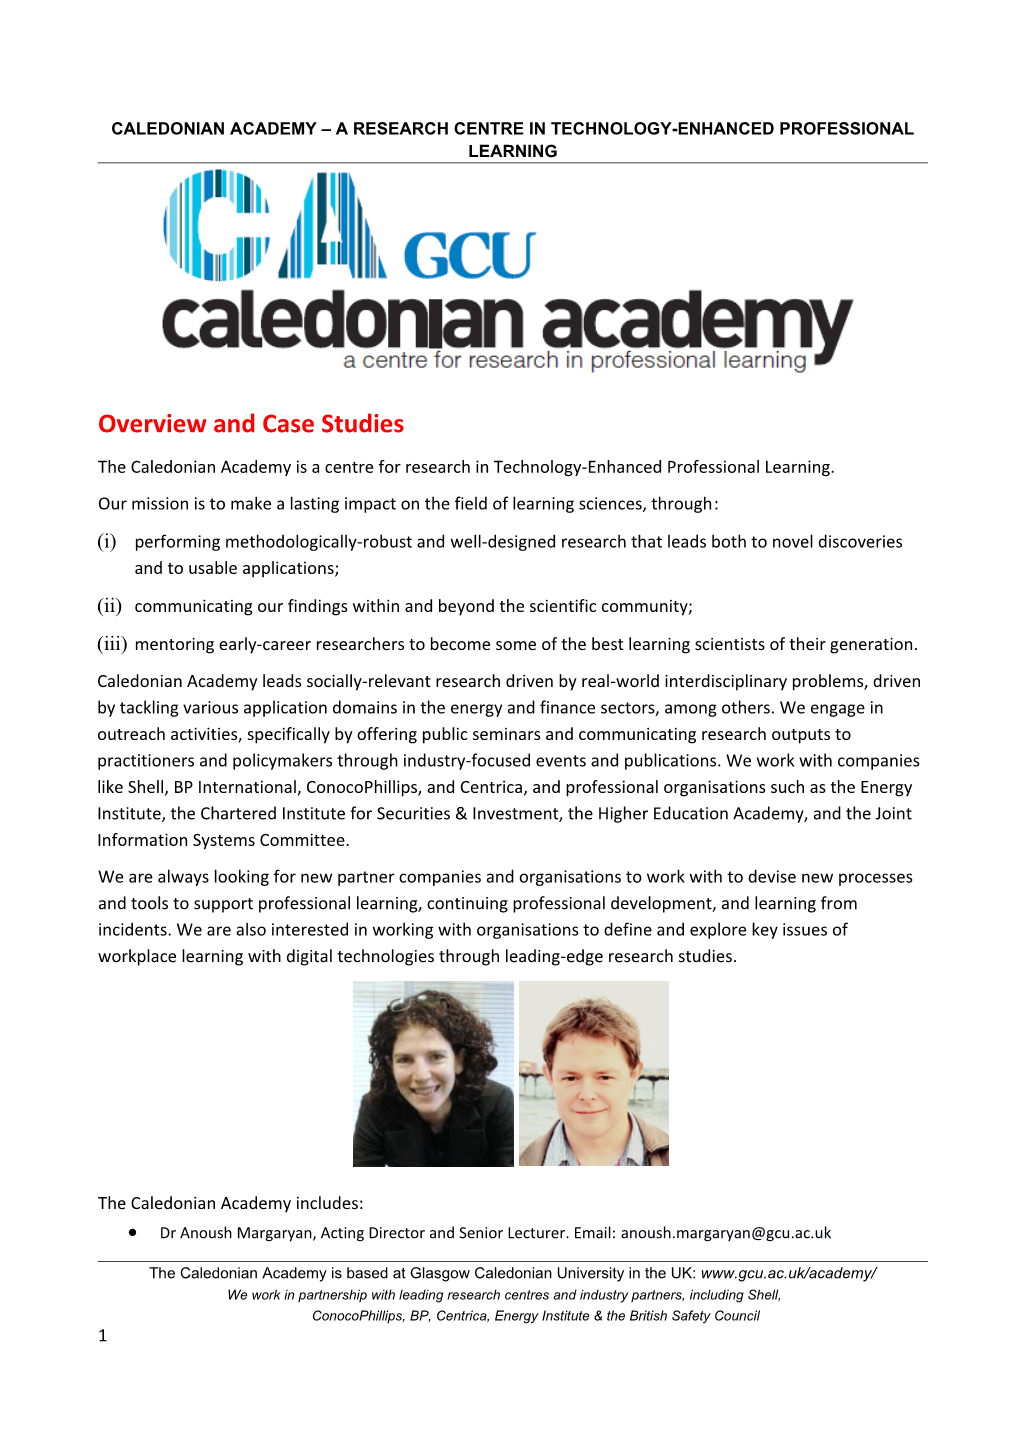 Caledonian Academy a Research Centre in Technology-Enhanced Professional Learning